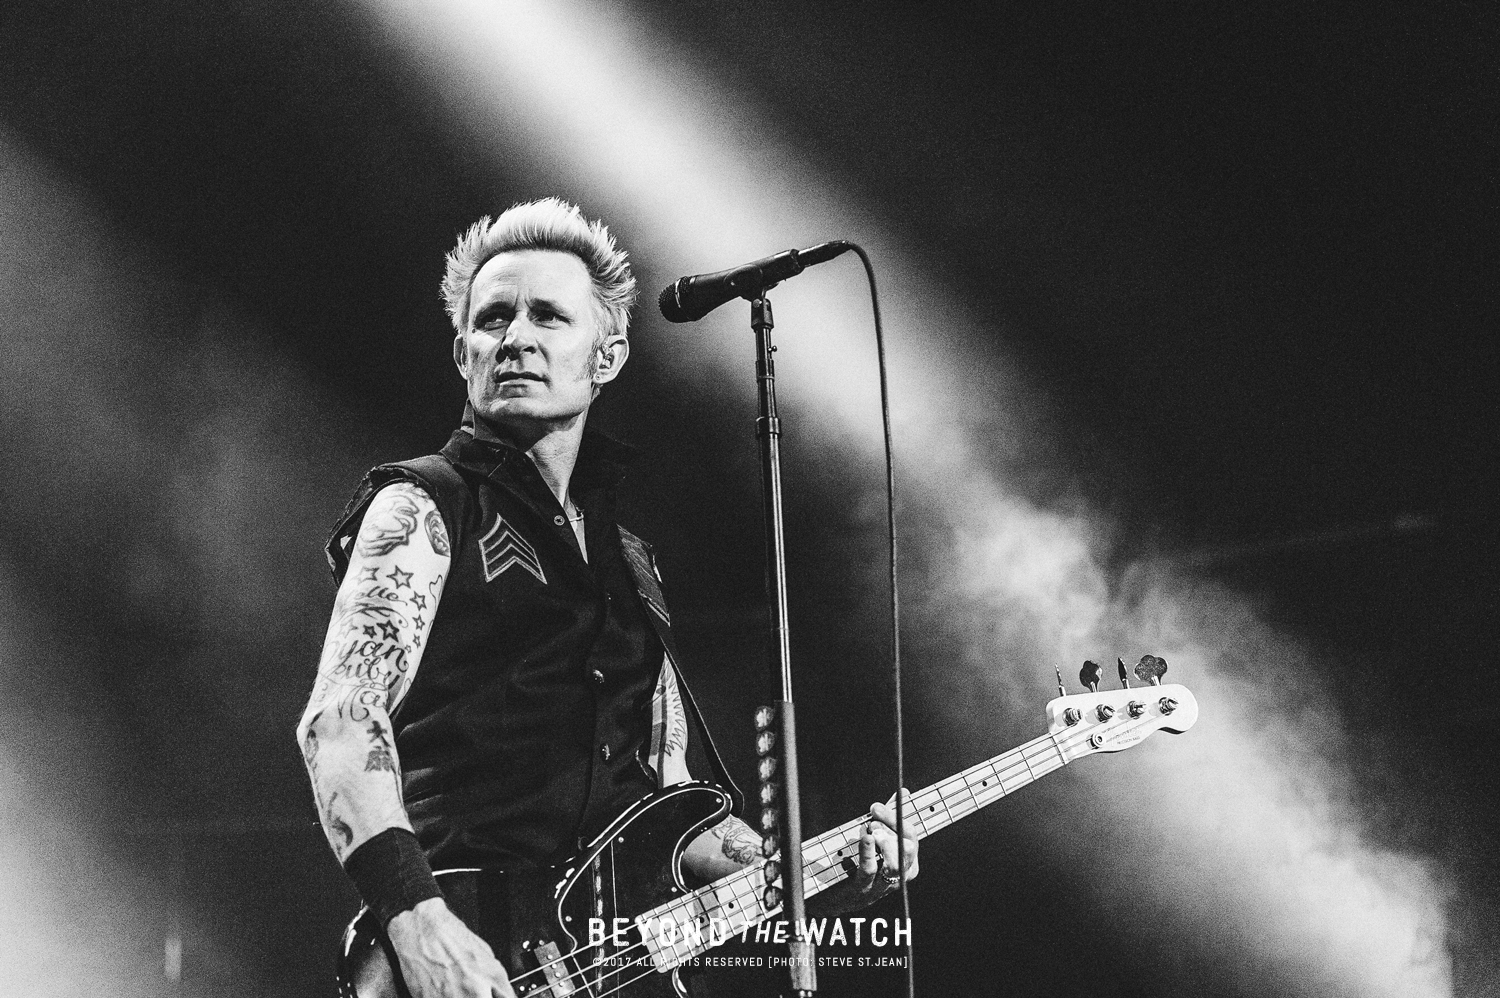  Mike Dirnt of Green Day 